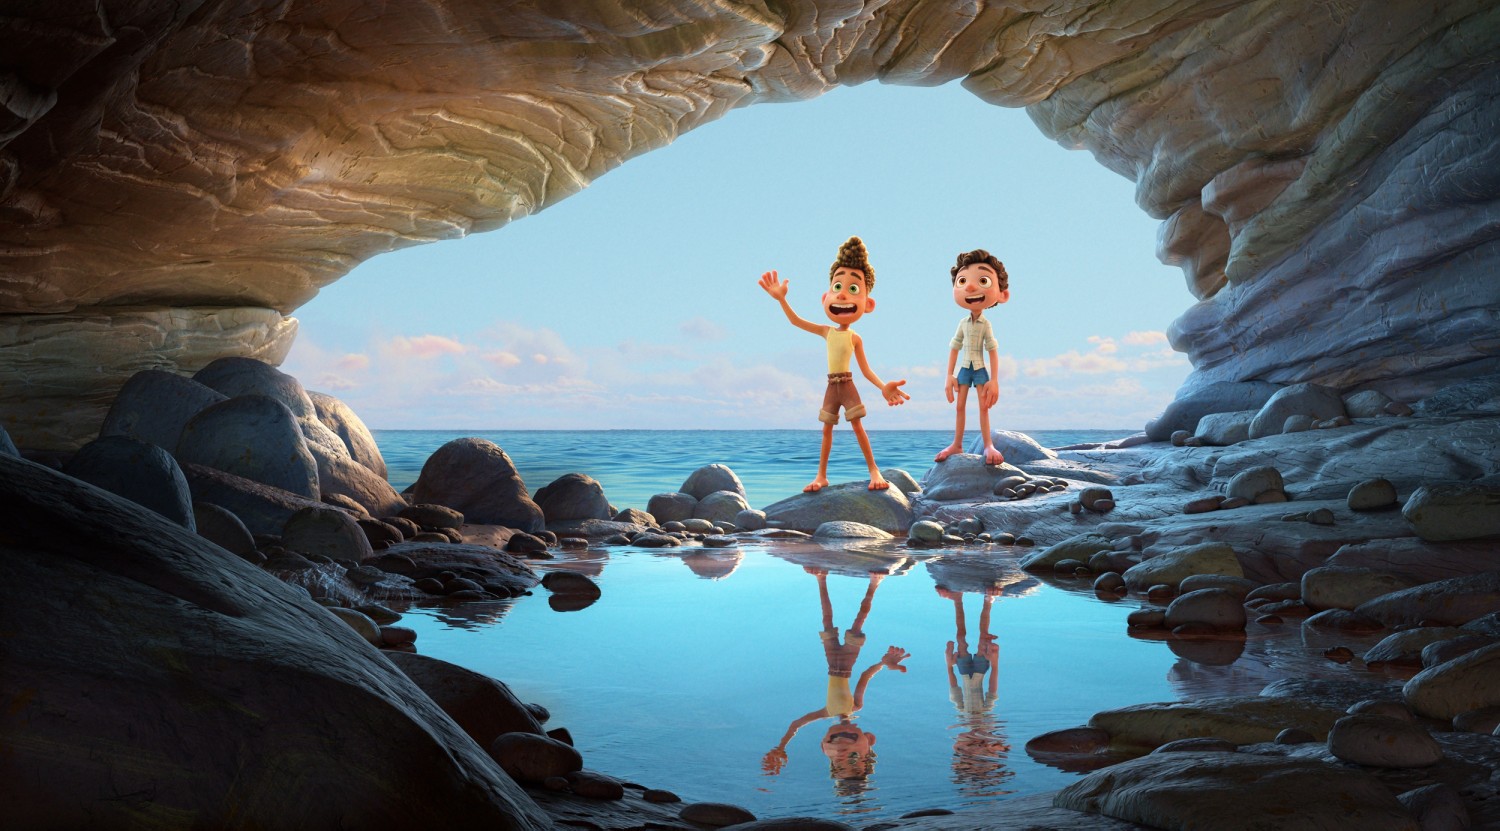 Luca,' movie review: New Pixar film is a gorgeous fun story for kids